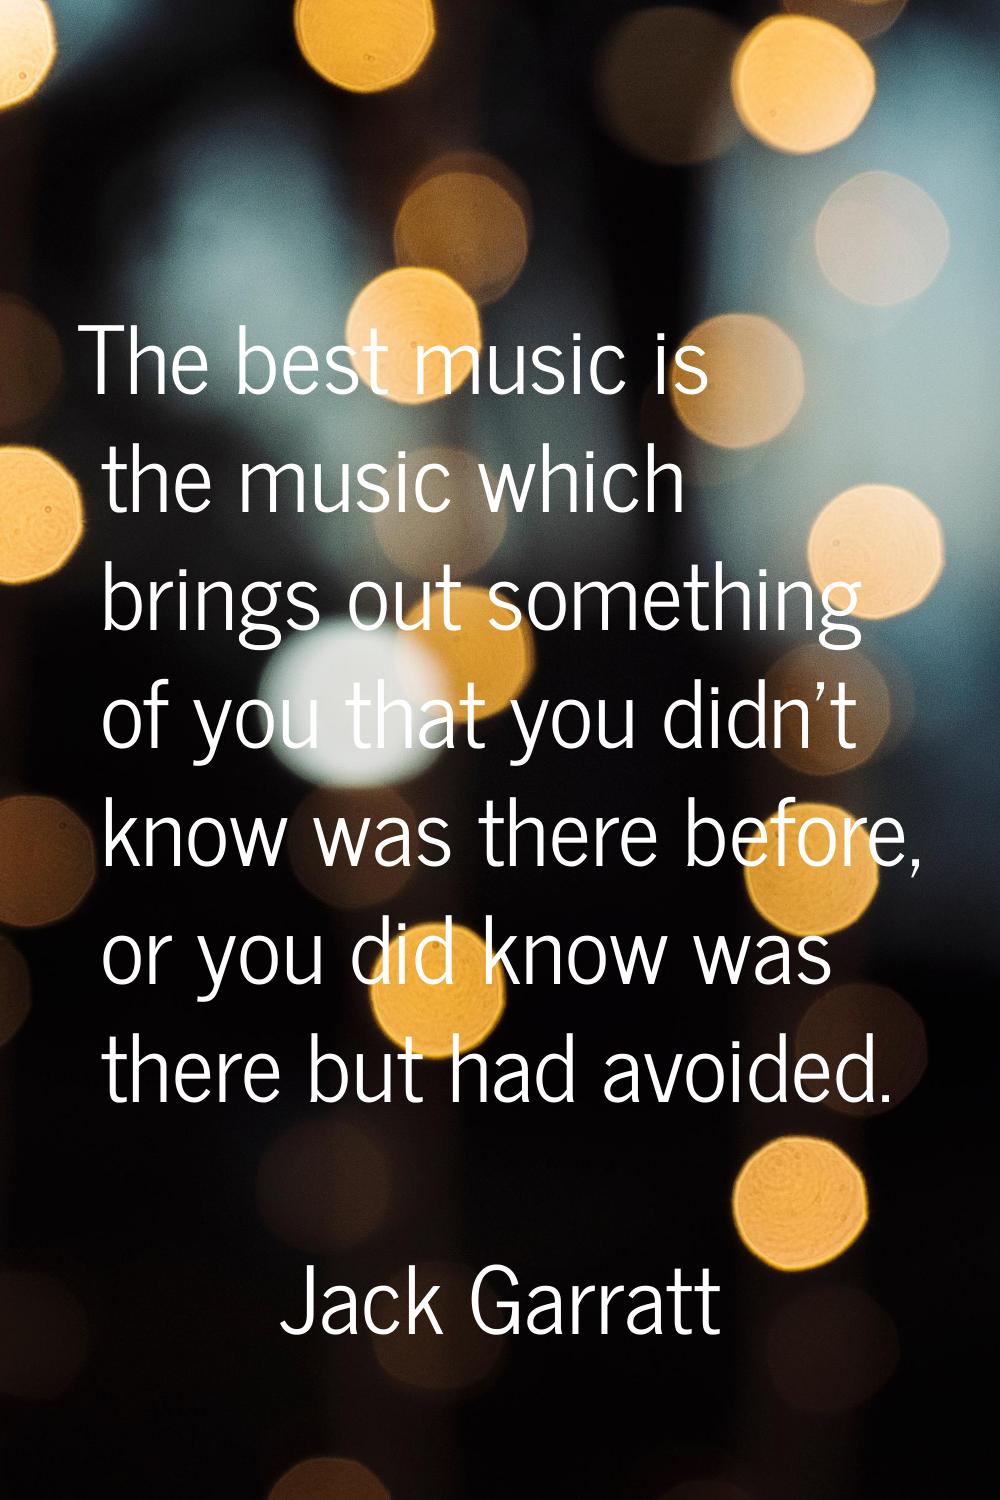 The best music is the music which brings out something of you that you didn't know was there before